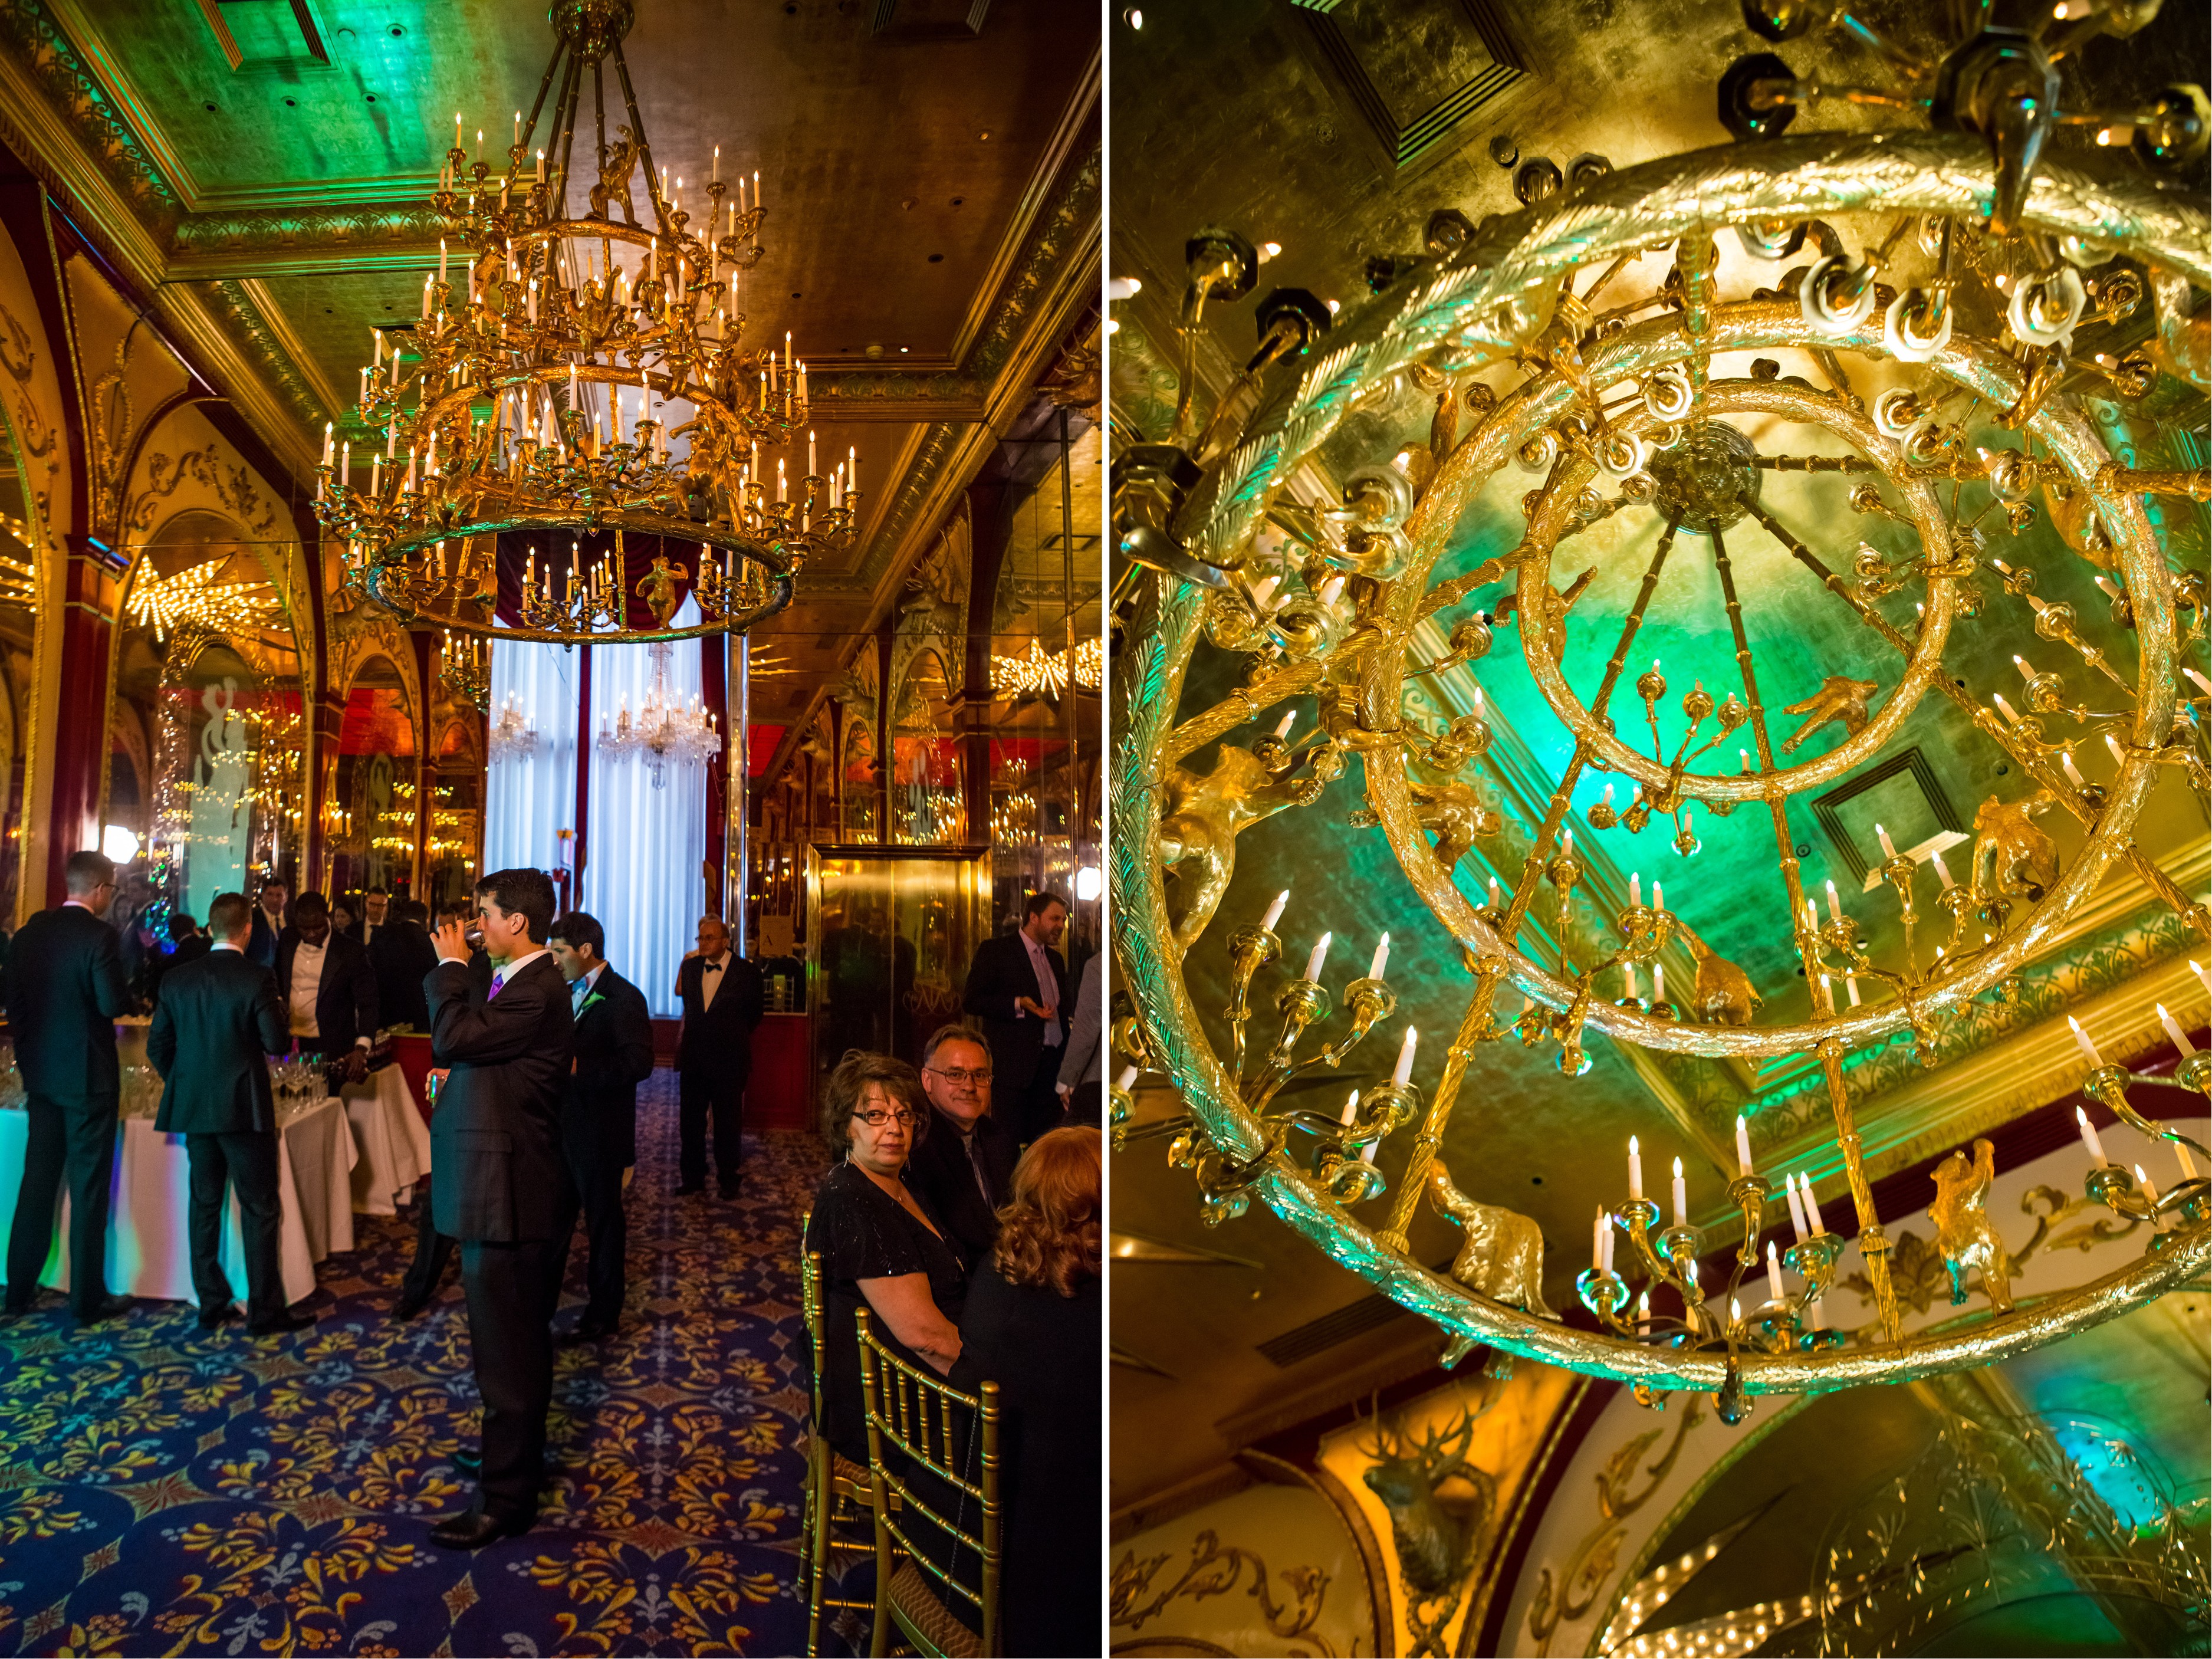 Emma_cleary_photography The Russian Tea Room25